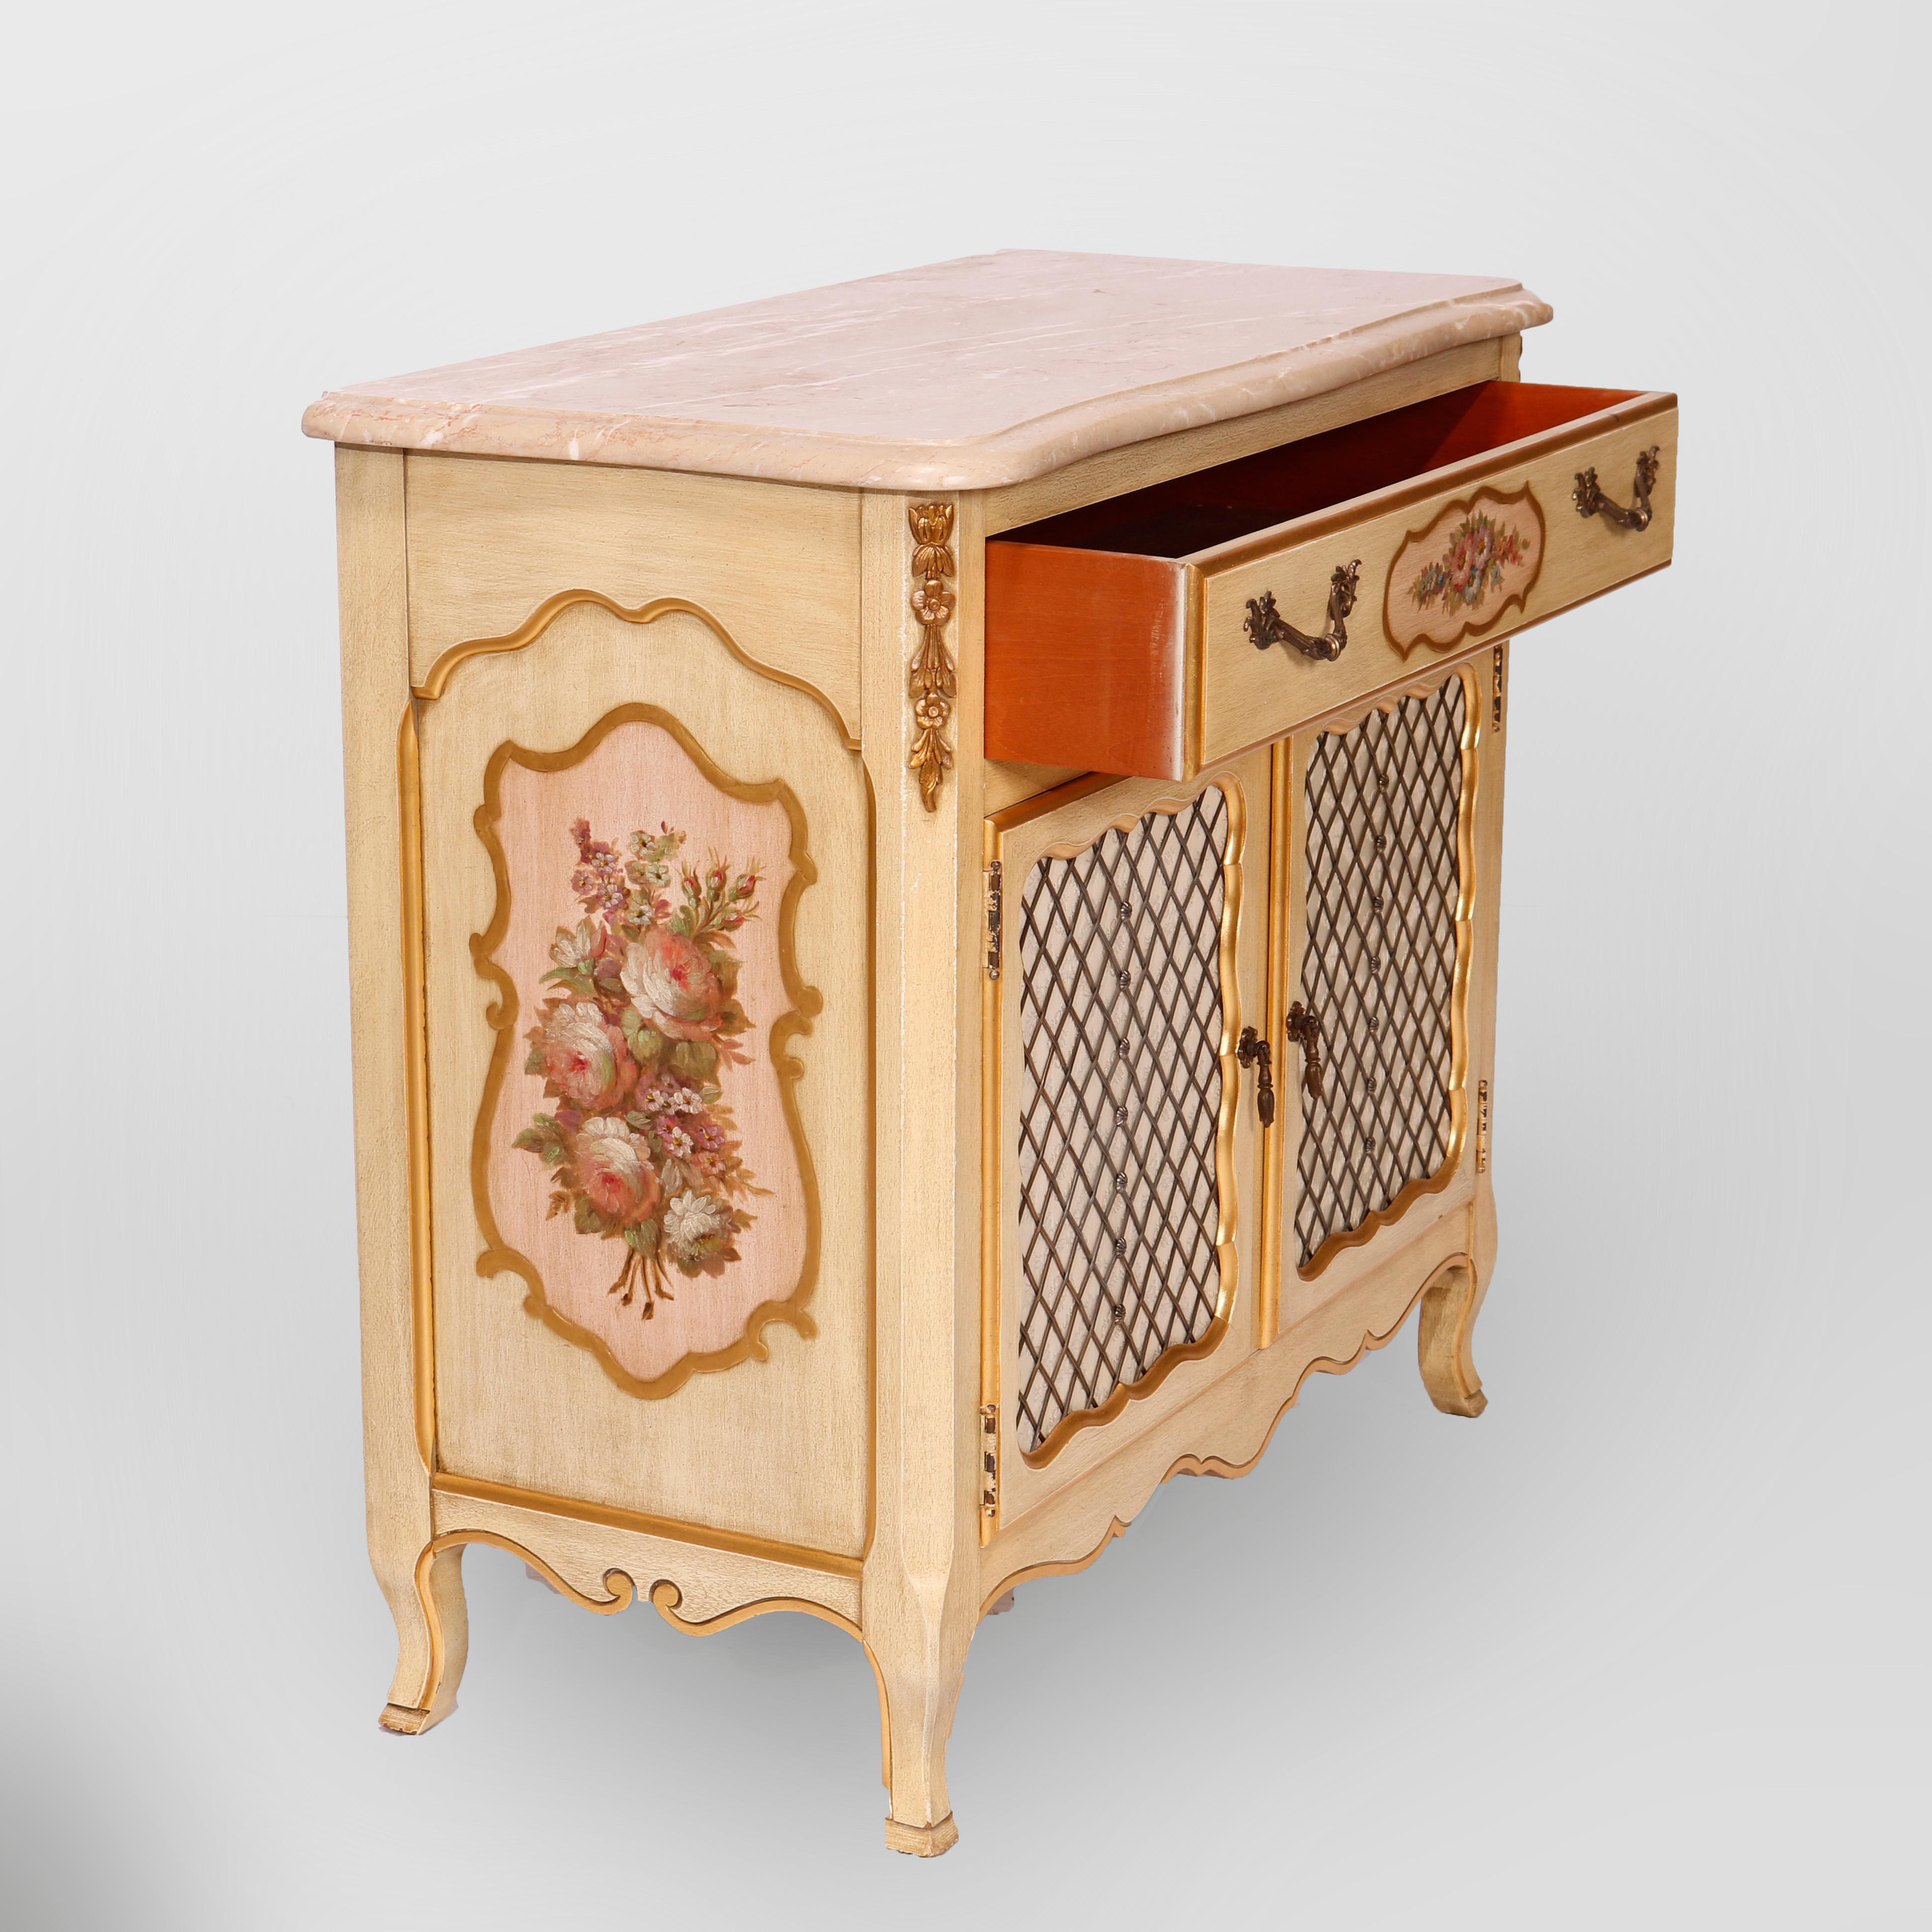 French Provincial Style Polychrome, Gilt &Marble Commode by Kozak Studios 20th C In Good Condition For Sale In Big Flats, NY